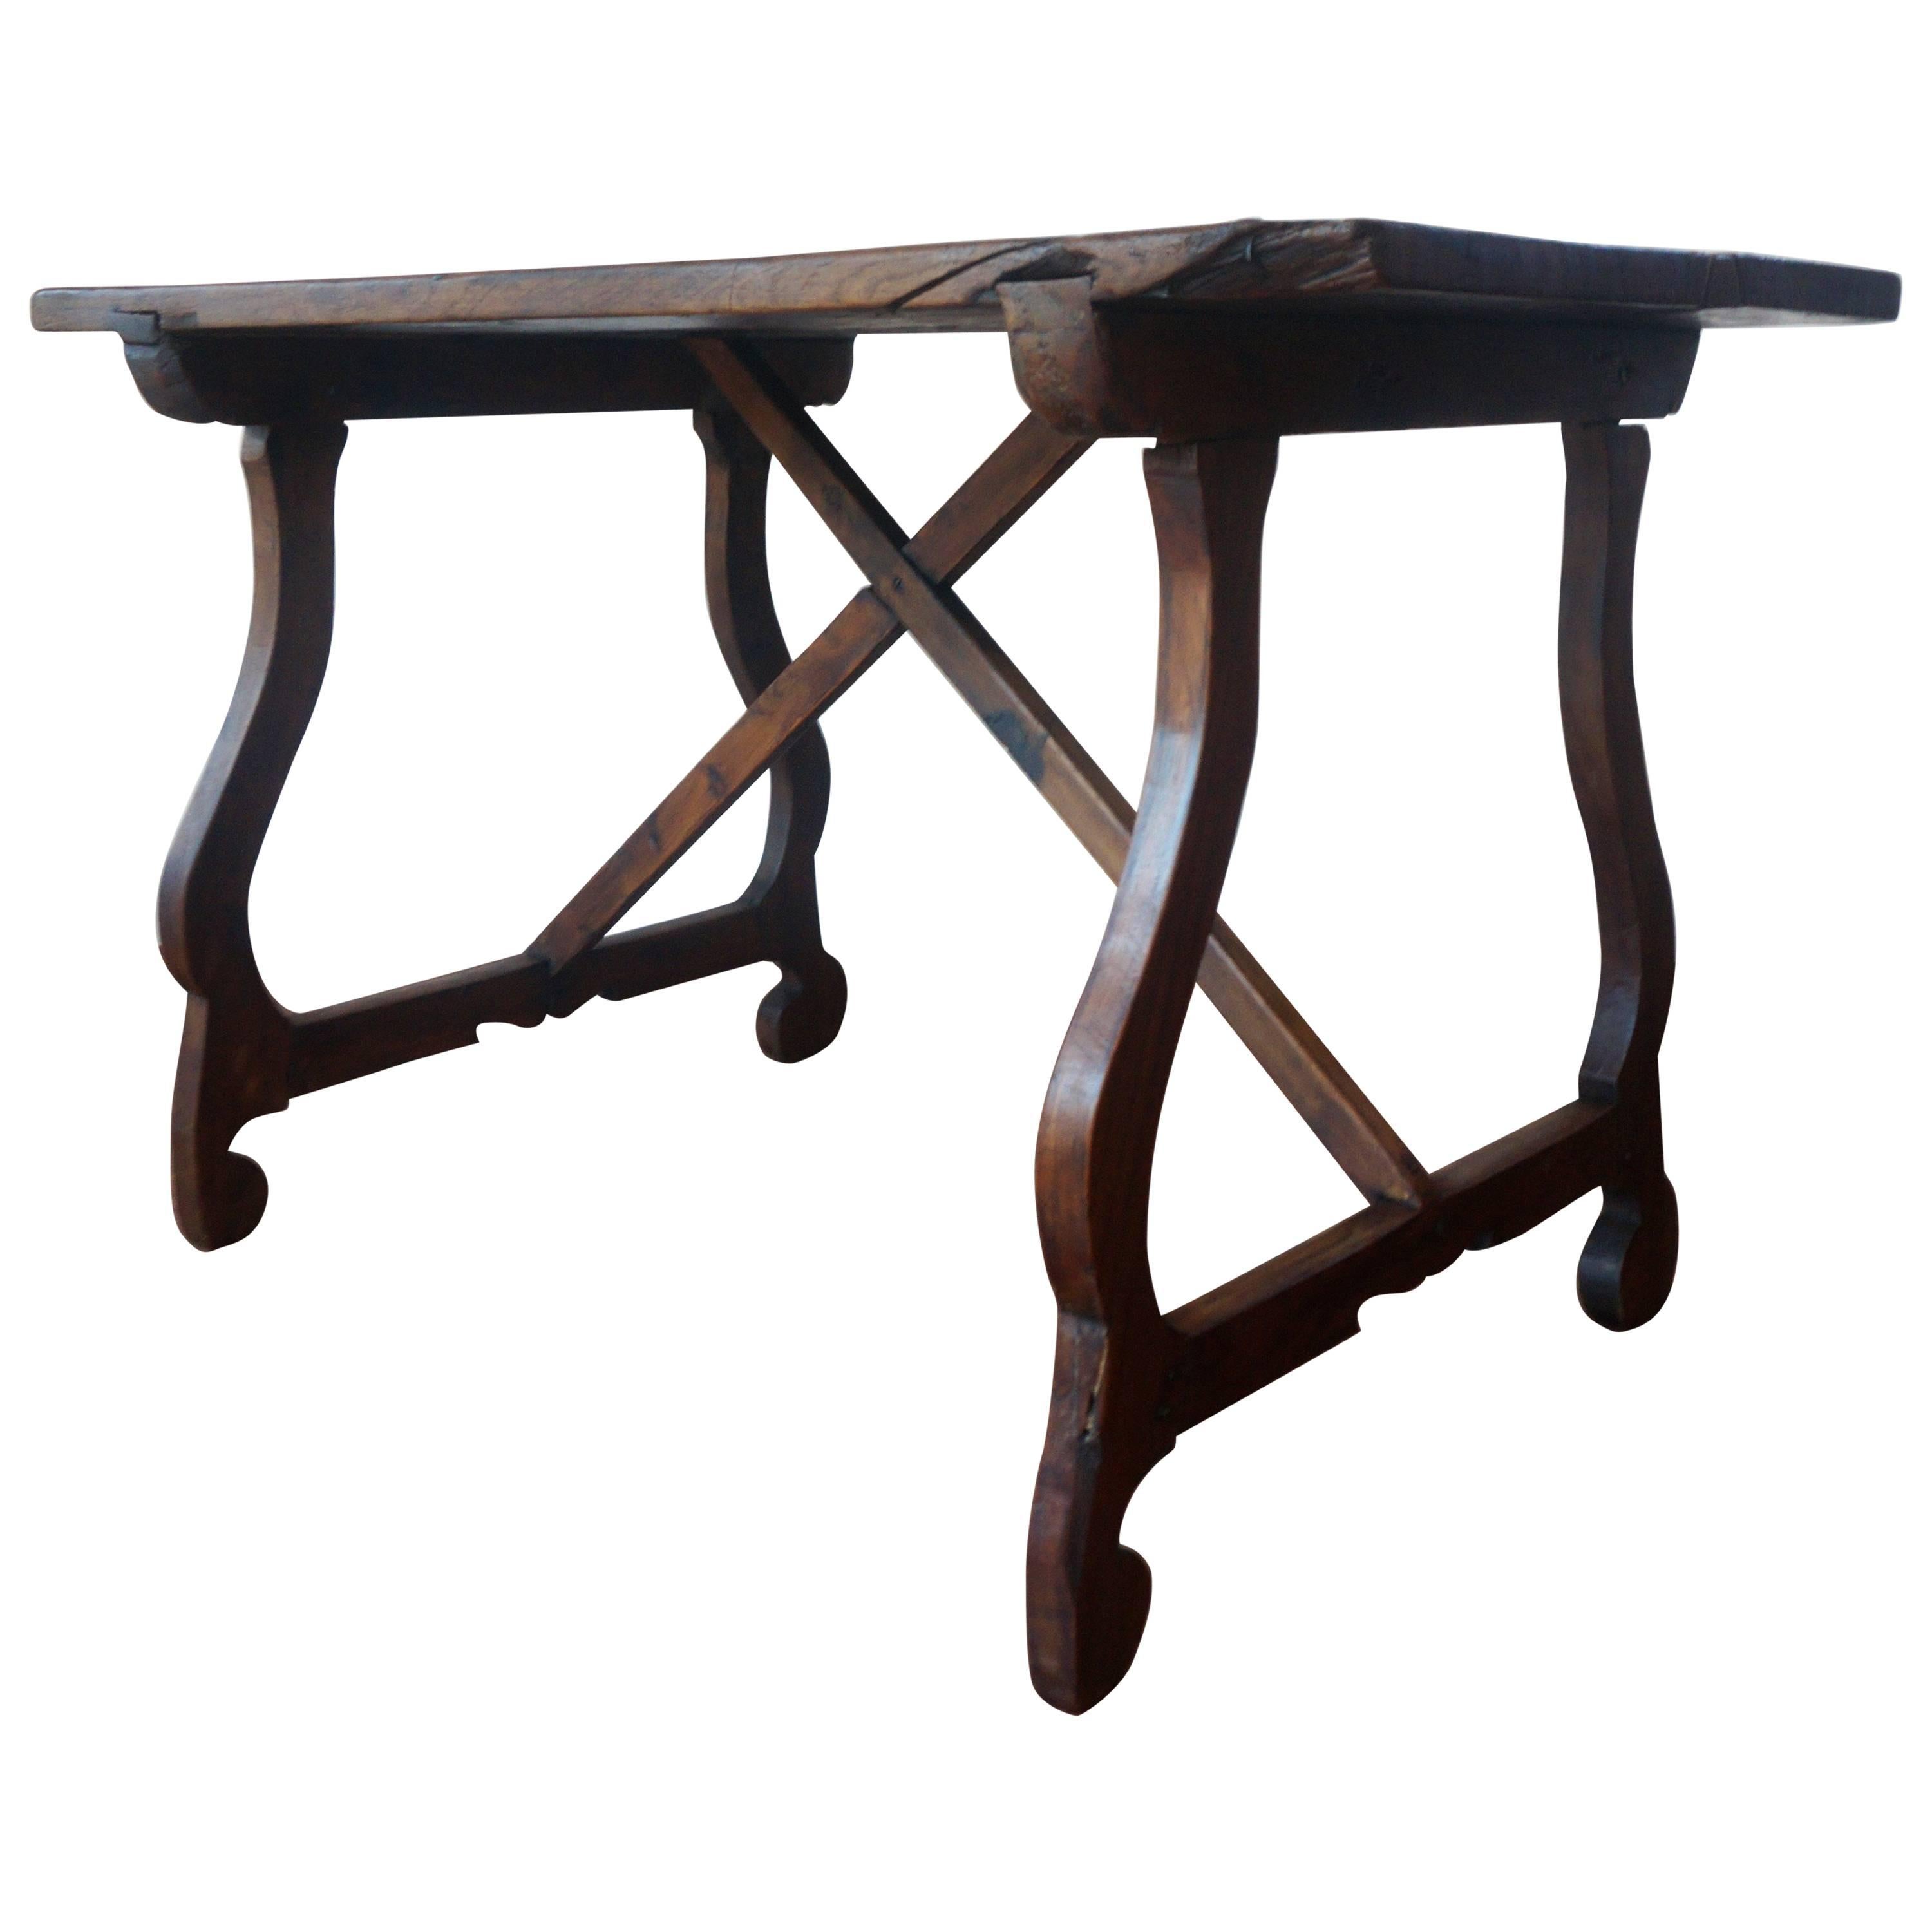 18th Century, Spanish Baroque Trestle Refectory Desk Table on Lyre-Shaped Legs